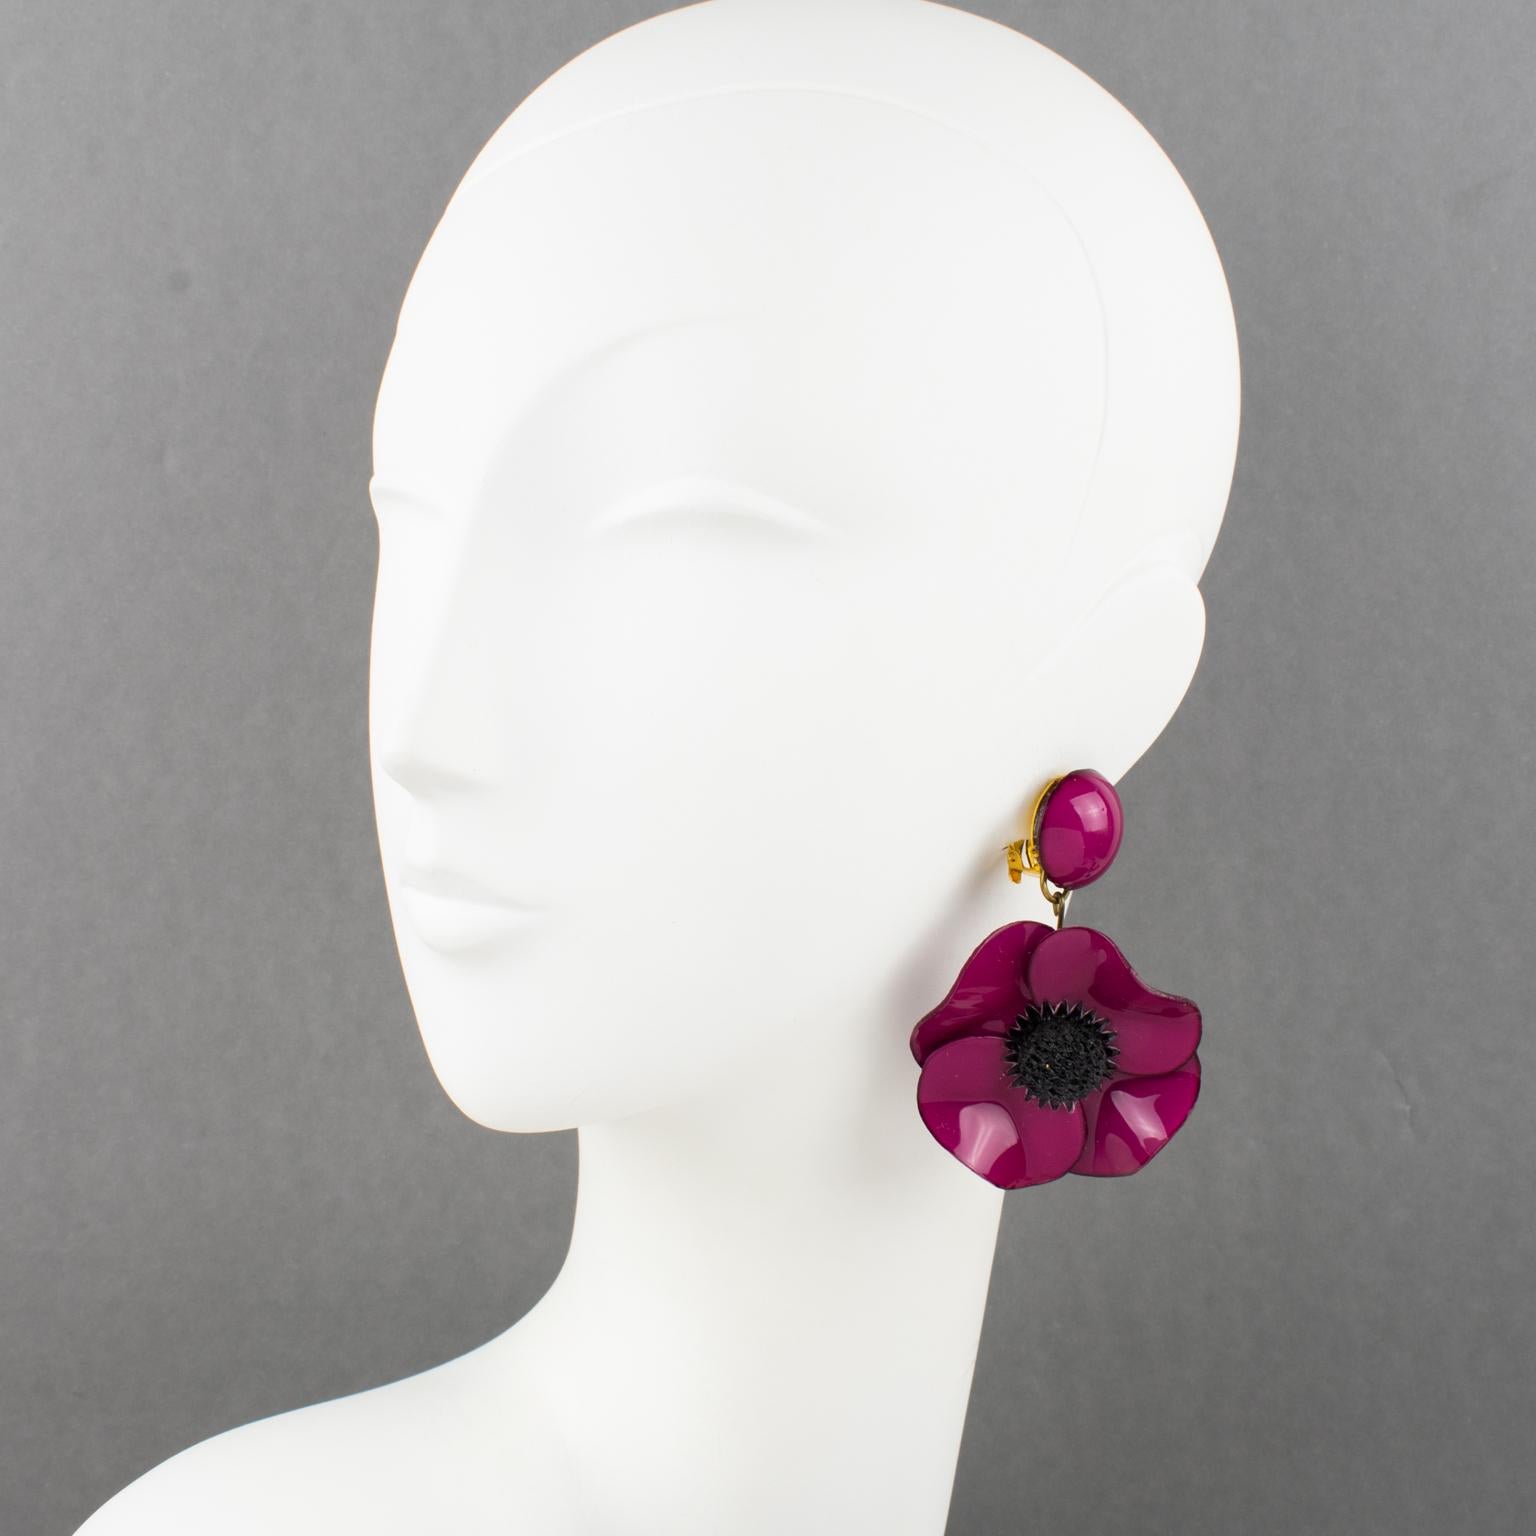 Cilea Paris designed these romantic dimensional dangling clip-on earrings. These oversized floral-inspired hand-made artisanal resin earrings feature poppy flowers with textured hearts built together to form a powerful statement piece. Very nice